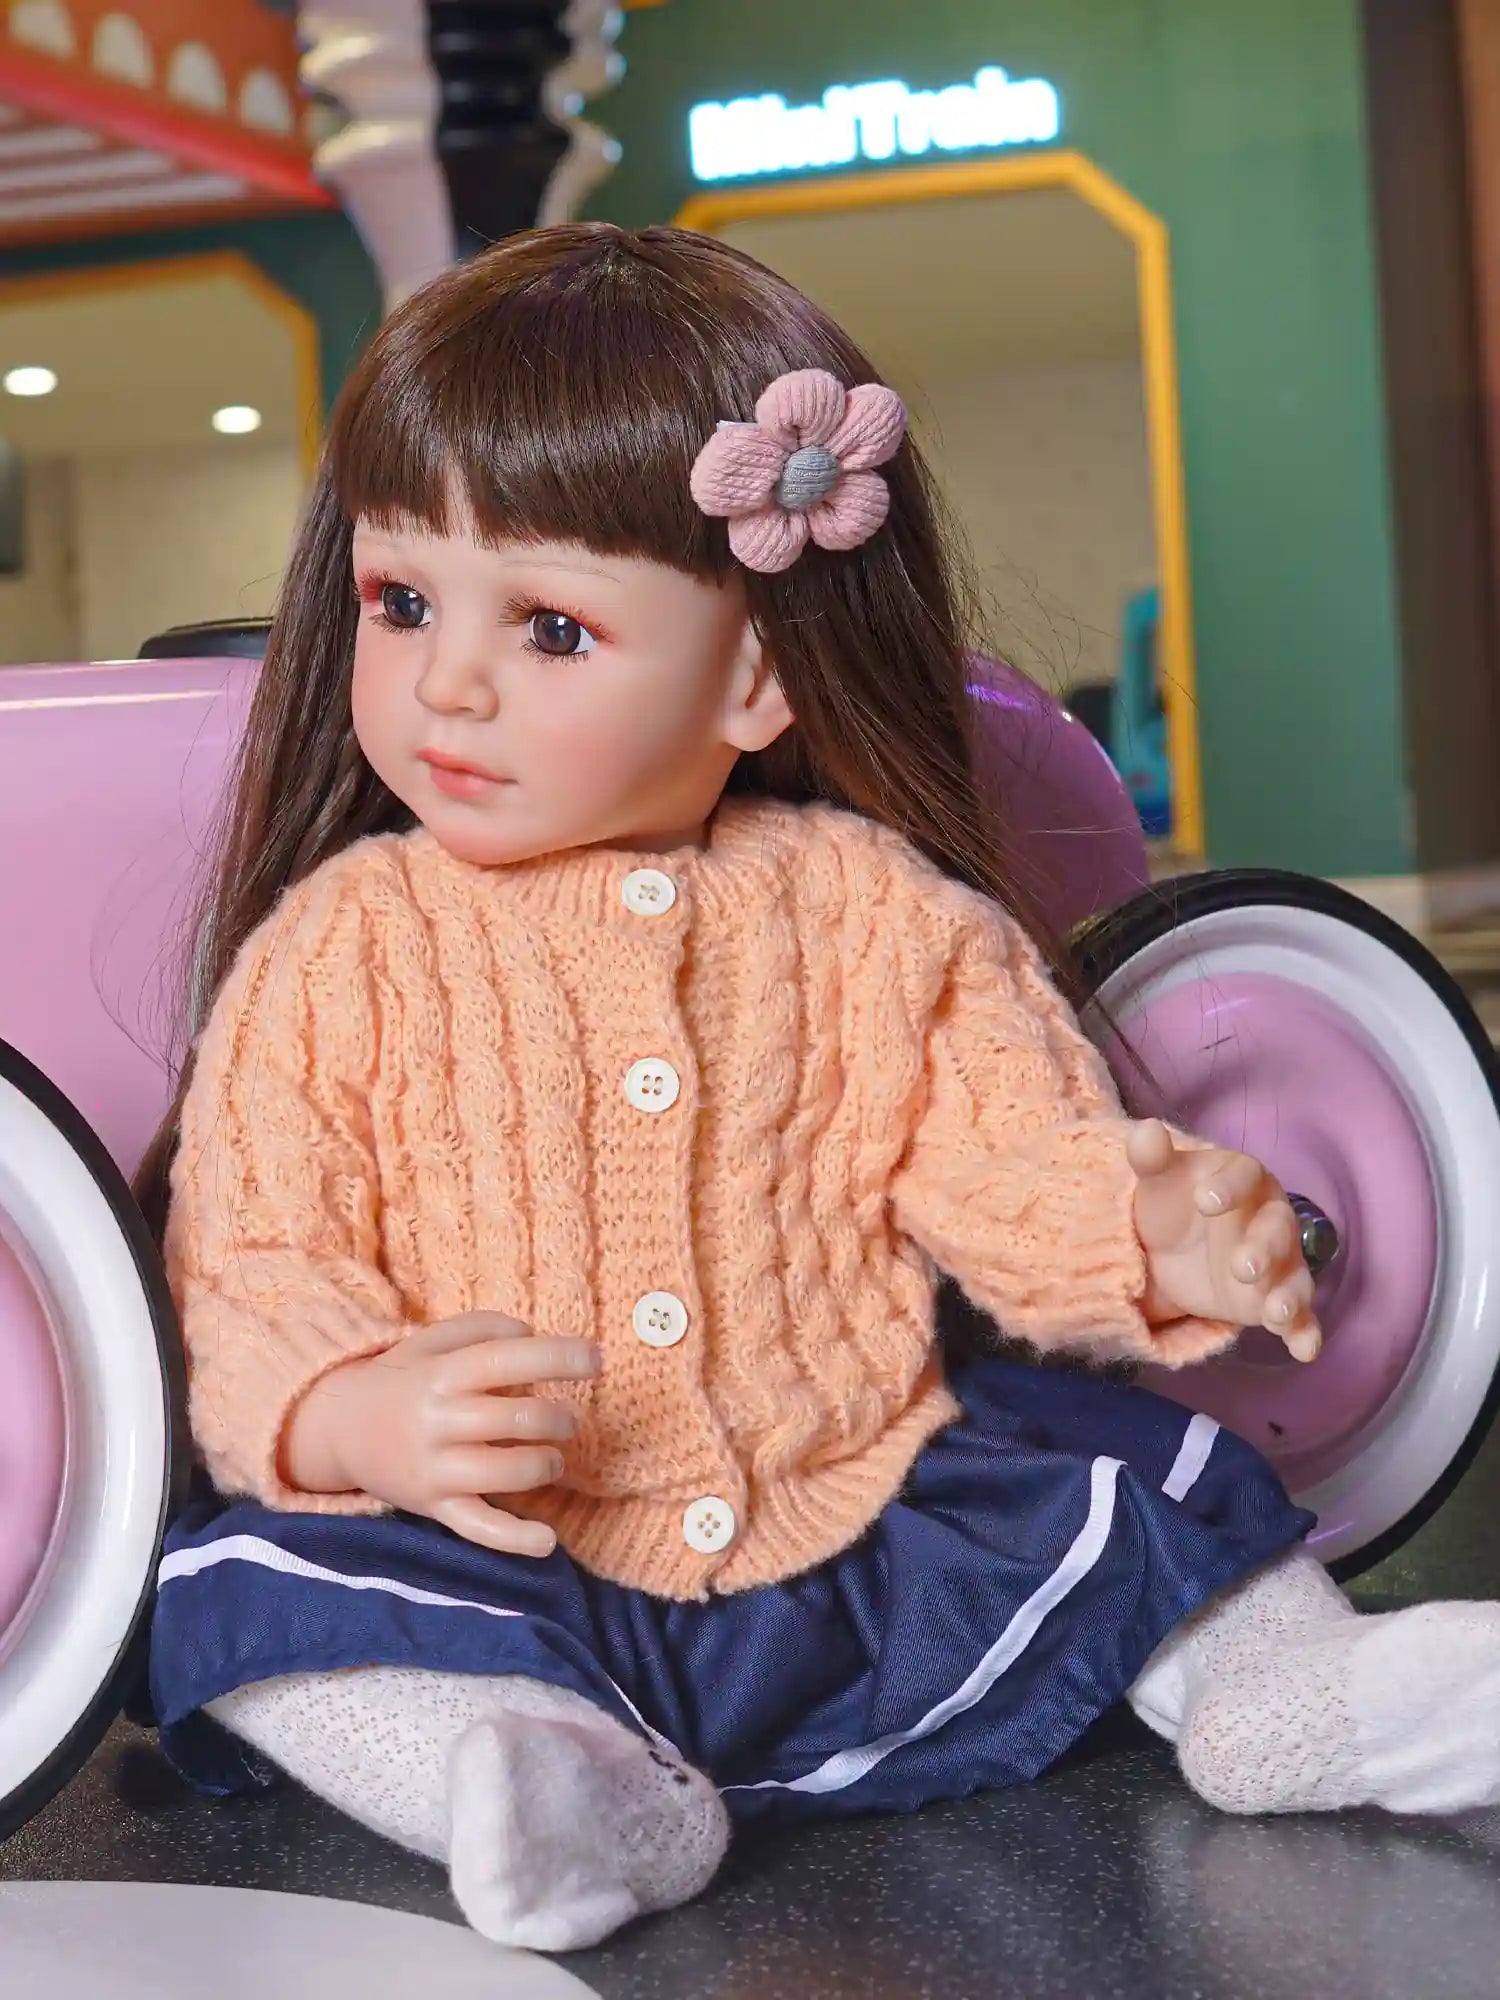 Toddler doll with brown hair and a knitted pink flower hair accessory, wearing an apricot sweater, seated beside a pink toy car.